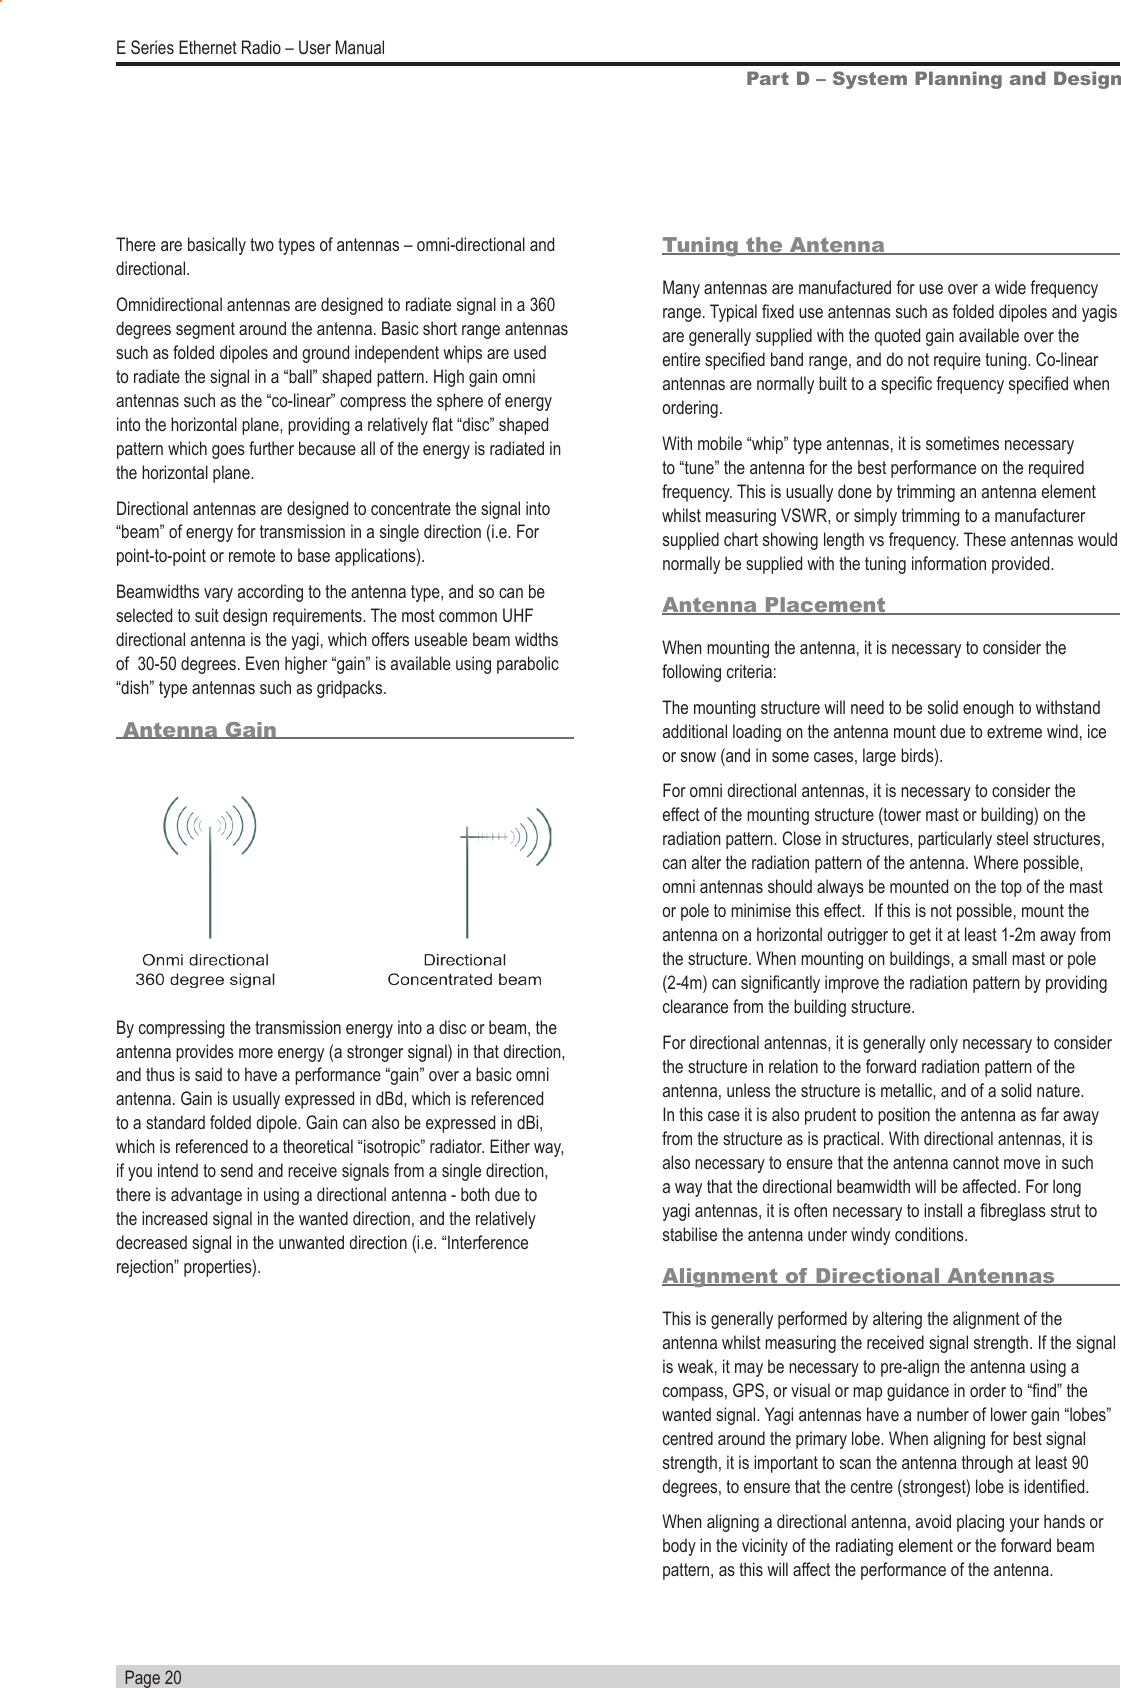   Page 20E Series Ethernet Radio – User ManualPart D – System Planning and DesignBy compressing the transmission energy into a disc or beam, the antenna provides more energy (a stronger signal) in that direction, and thus is said to have a performance “gain” over a basic omni antenna. Gain is usually expressed in dBd, which is referenced to a standard folded dipole. Gain can also be expressed in dBi, which is referenced to a theoretical “isotropic” radiator. Either way, if you intend to send and receive signals from a single direction, there is advantage in using a directional antenna - both due to the increased signal in the wanted direction, and the relatively decreased signal in the unwanted direction (i.e. “Interference rejection” properties).Tuning the AntennaMany antennas are manufactured for use over a wide frequency range. Typical xed use antennas such as folded dipoles and yagis are generally supplied with the quoted gain available over the entire specied band range, and do not require tuning. Co-linear antennas are normally built to a specic frequency specied when ordering.With mobile “whip” type antennas, it is sometimes necessary to “tune” the antenna for the best performance on the required frequency. This is usually done by trimming an antenna element whilst measuring VSWR, or simply trimming to a manufacturer supplied chart showing length vs frequency. These antennas would normally be supplied with the tuning information provided.Antenna PlacementWhen mounting the antenna, it is necessary to consider the following criteria:The mounting structure will need to be solid enough to withstand additional loading on the antenna mount due to extreme wind, ice or snow (and in some cases, large birds).For omni directional antennas, it is necessary to consider the effect of the mounting structure (tower mast or building) on the radiation pattern. Close in structures, particularly steel structures, can alter the radiation pattern of the antenna. Where possible, omni antennas should always be mounted on the top of the mast or pole to minimise this effect.  If this is not possible, mount the antenna on a horizontal outrigger to get it at least 1-2m away from the structure. When mounting on buildings, a small mast or pole (2-4m) can signicantly improve the radiation pattern by providing clearance from the building structure.For directional antennas, it is generally only necessary to consider the structure in relation to the forward radiation pattern of the antenna, unless the structure is metallic, and of a solid nature. In this case it is also prudent to position the antenna as far away from the structure as is practical. With directional antennas, it is also necessary to ensure that the antenna cannot move in such a way that the directional beamwidth will be affected. For long yagi antennas, it is often necessary to install a breglass strut to stabilise the antenna under windy conditions.Alignment of Directional AntennasThis is generally performed by altering the alignment of the antenna whilst measuring the received signal strength. If the signal is weak, it may be necessary to pre-align the antenna using a compass, GPS, or visual or map guidance in order to “nd” the wanted signal. Yagi antennas have a number of lower gain “lobes” centred around the primary lobe. When aligning for best signal strength, it is important to scan the antenna through at least 90 degrees, to ensure that the centre (strongest) lobe is identied.When aligning a directional antenna, avoid placing your hands or body in the vicinity of the radiating element or the forward beam pattern, as this will affect the performance of the antenna.There are basically two types of antennas – omni-directional and directional.Omnidirectional antennas are designed to radiate signal in a 360 degrees segment around the antenna. Basic short range antennas such as folded dipoles and ground independent whips are used to radiate the signal in a “ball” shaped pattern. High gain omni antennas such as the “co-linear” compress the sphere of energy into the horizontal plane, providing a relatively at “disc” shaped pattern which goes further because all of the energy is radiated in the horizontal plane.Directional antennas are designed to concentrate the signal into “beam” of energy for transmission in a single direction (i.e. For point-to-point or remote to base applications).Beamwidths vary according to the antenna type, and so can be selected to suit design requirements. The most common UHF directional antenna is the yagi, which offers useable beam widths of  30-50 degrees. Even higher “gain” is available using parabolic “dish” type antennas such as gridpacks. Antenna Gain